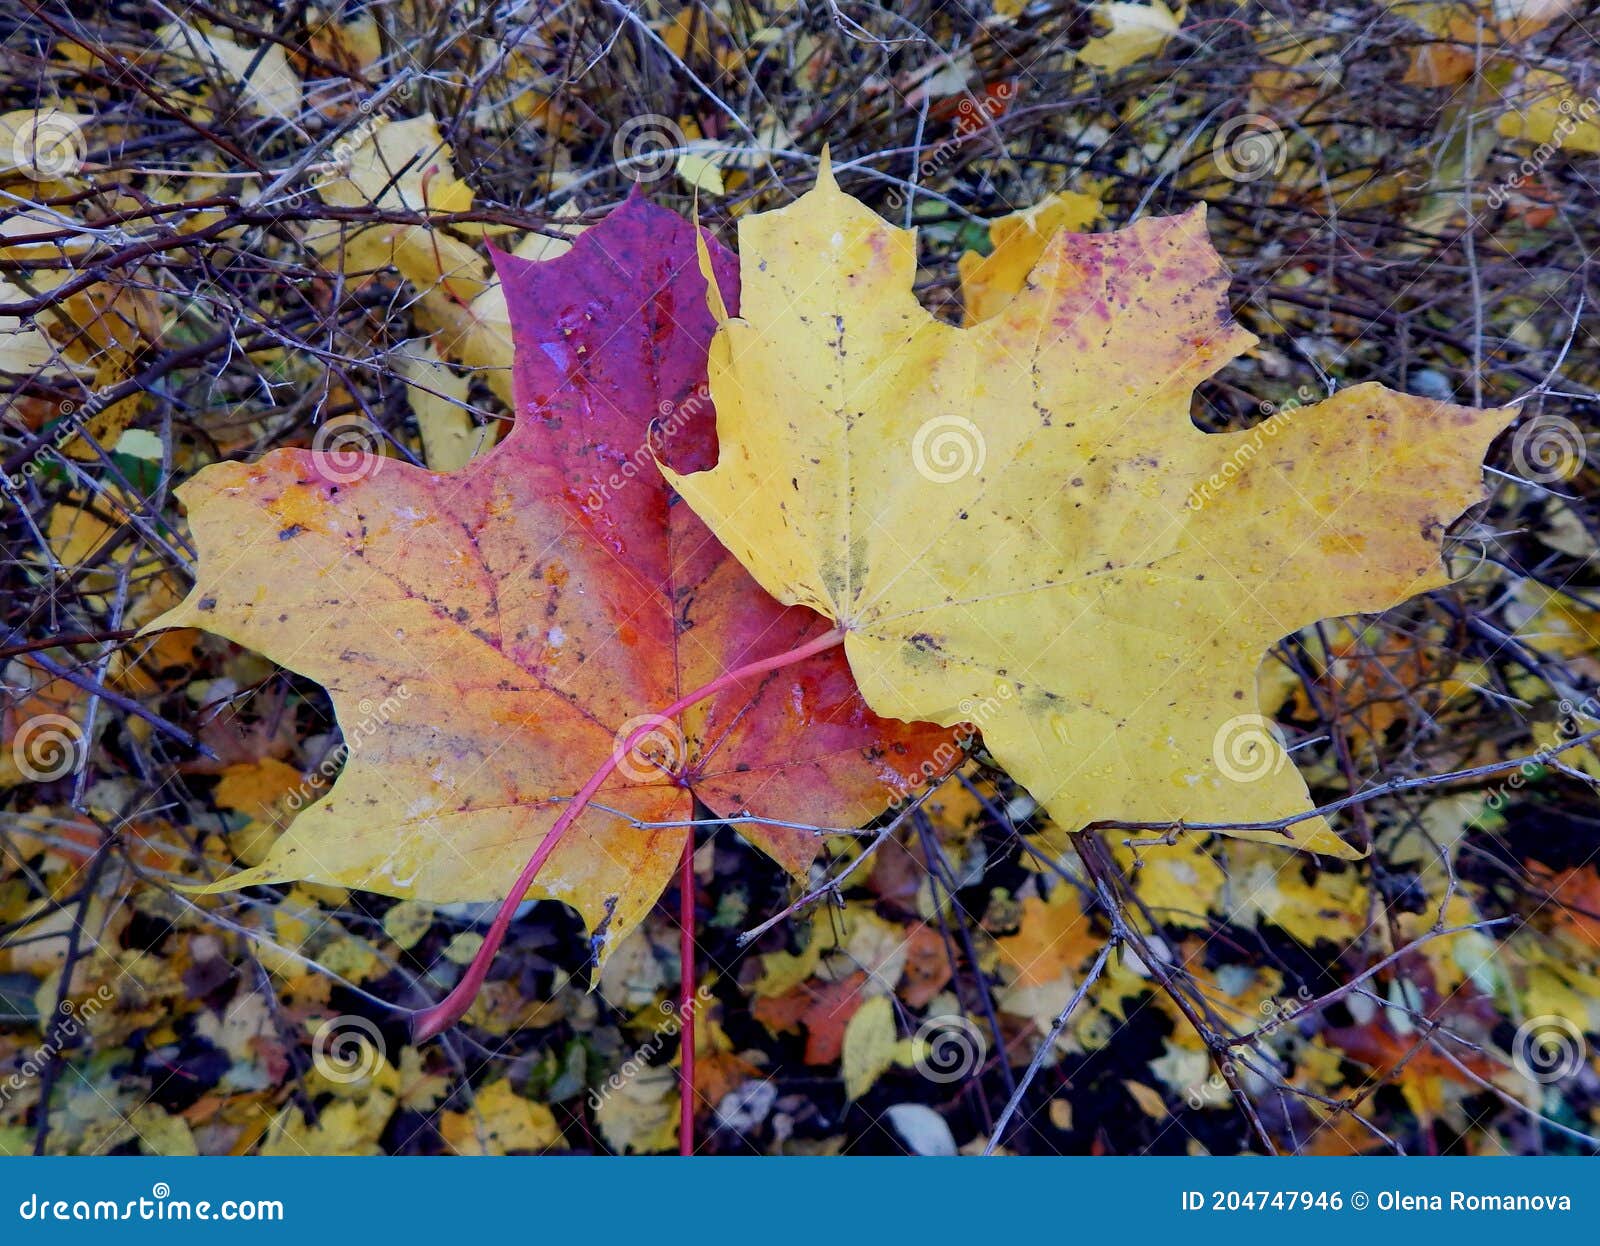 Two Fallen Maple Leaves Yellow and Red on the Ground among Leaves and ...